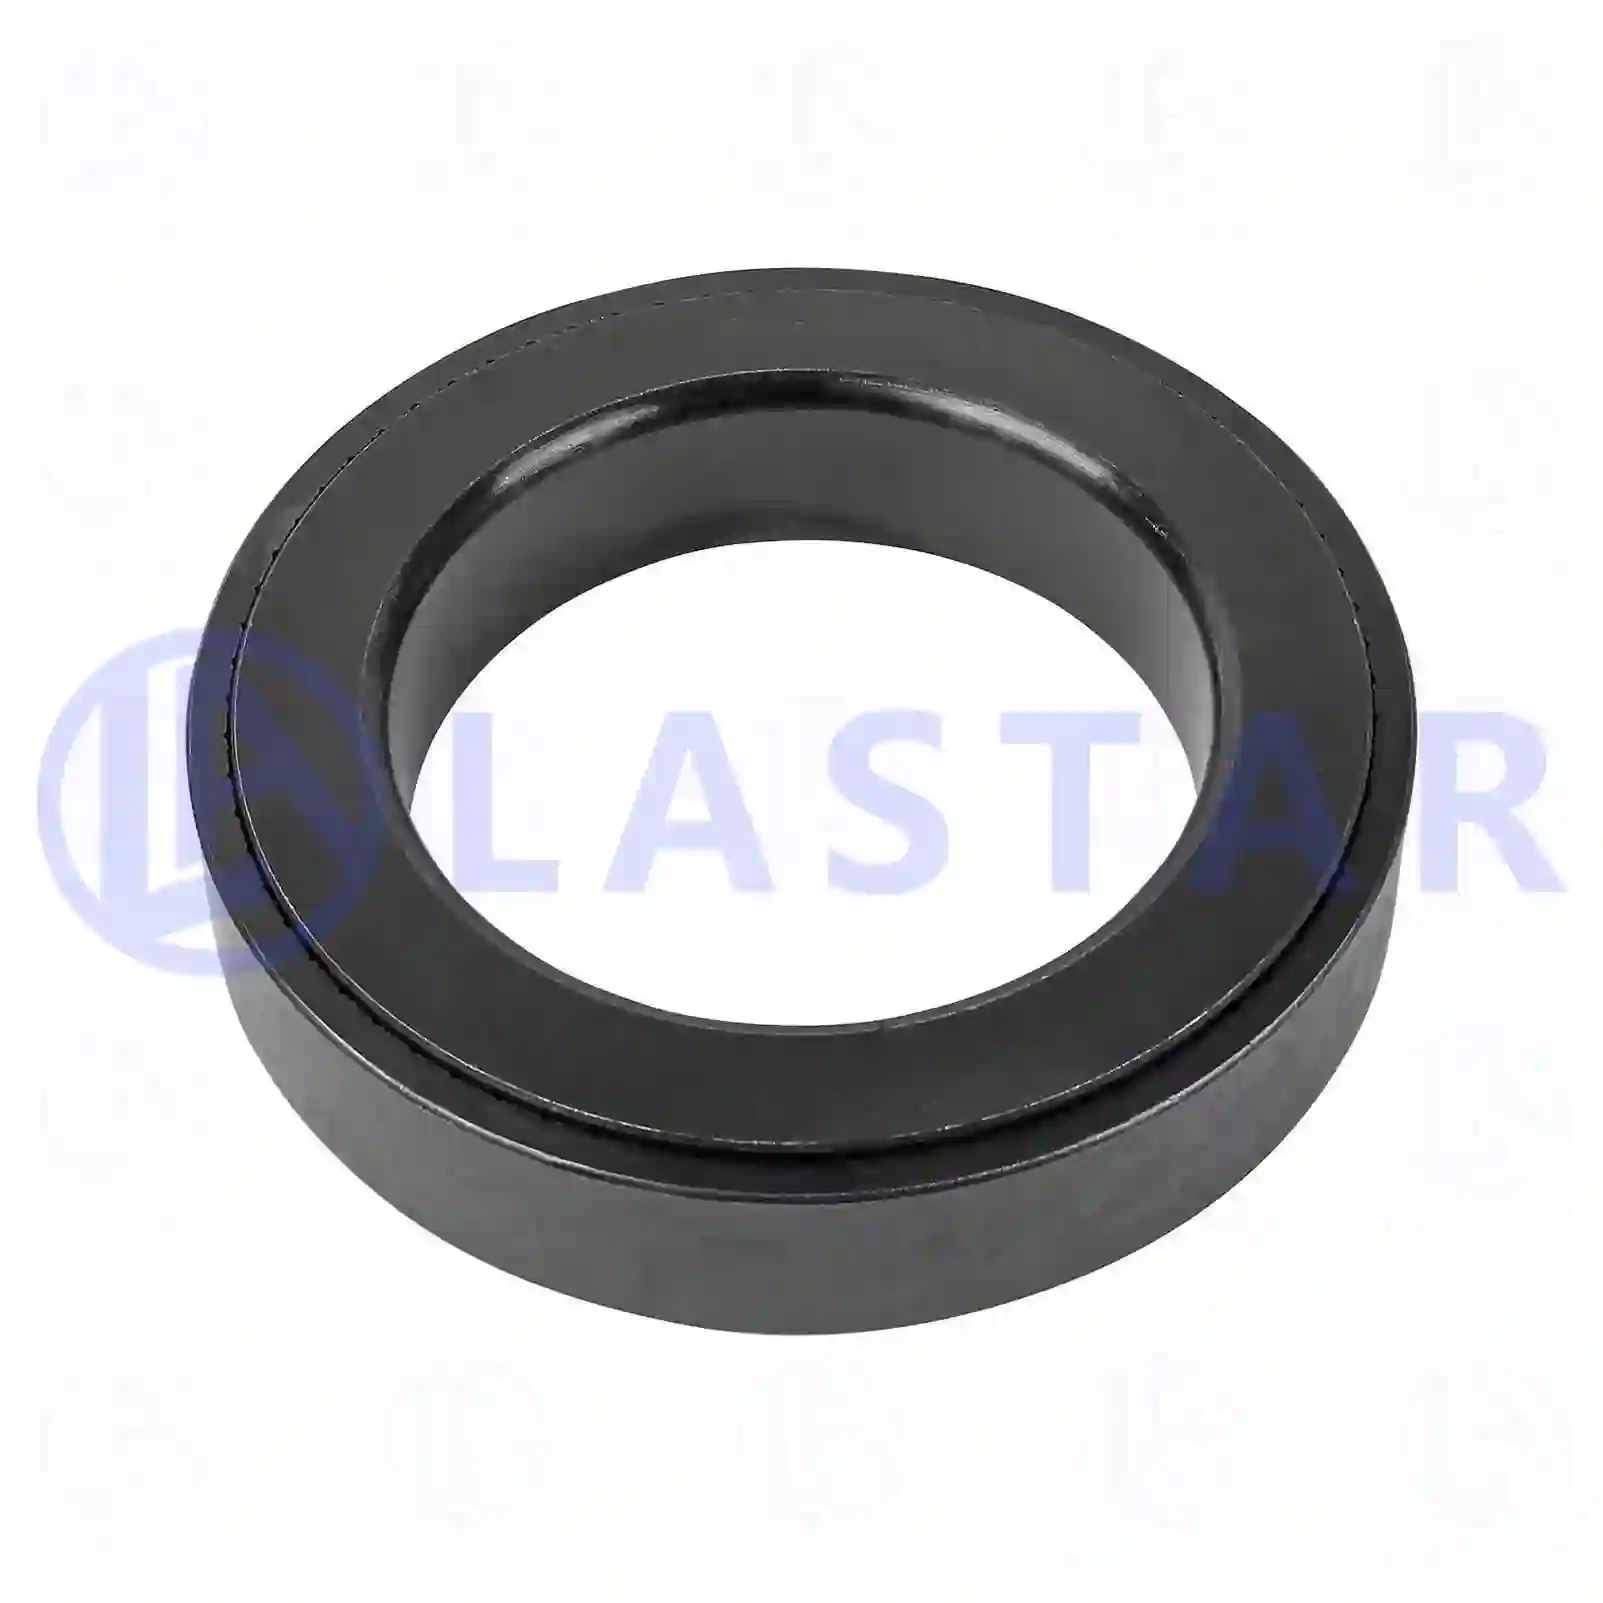 Joint bearing, 77729223, 08138308, 8138308, ||  77729223 Lastar Spare Part | Truck Spare Parts, Auotomotive Spare Parts Joint bearing, 77729223, 08138308, 8138308, ||  77729223 Lastar Spare Part | Truck Spare Parts, Auotomotive Spare Parts